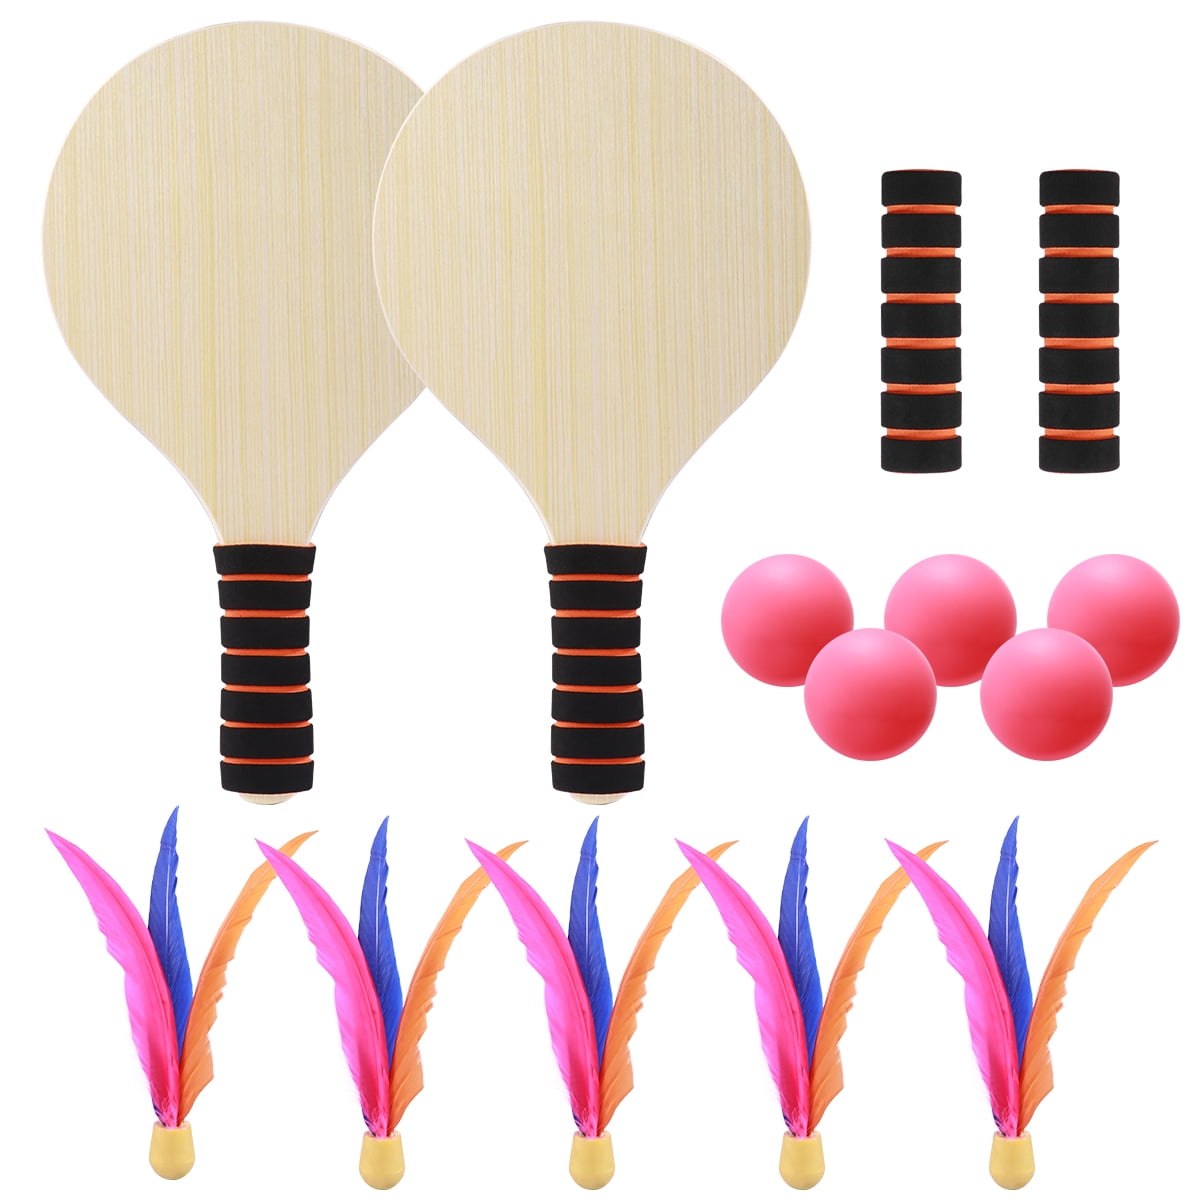 Overmont Game Set Beach Paddle Set with Wooden Racket Beachball Badminton Racquet Cricket Ball shuttlecock game and Family Training Kids Childrens Office Outdoor Sports 